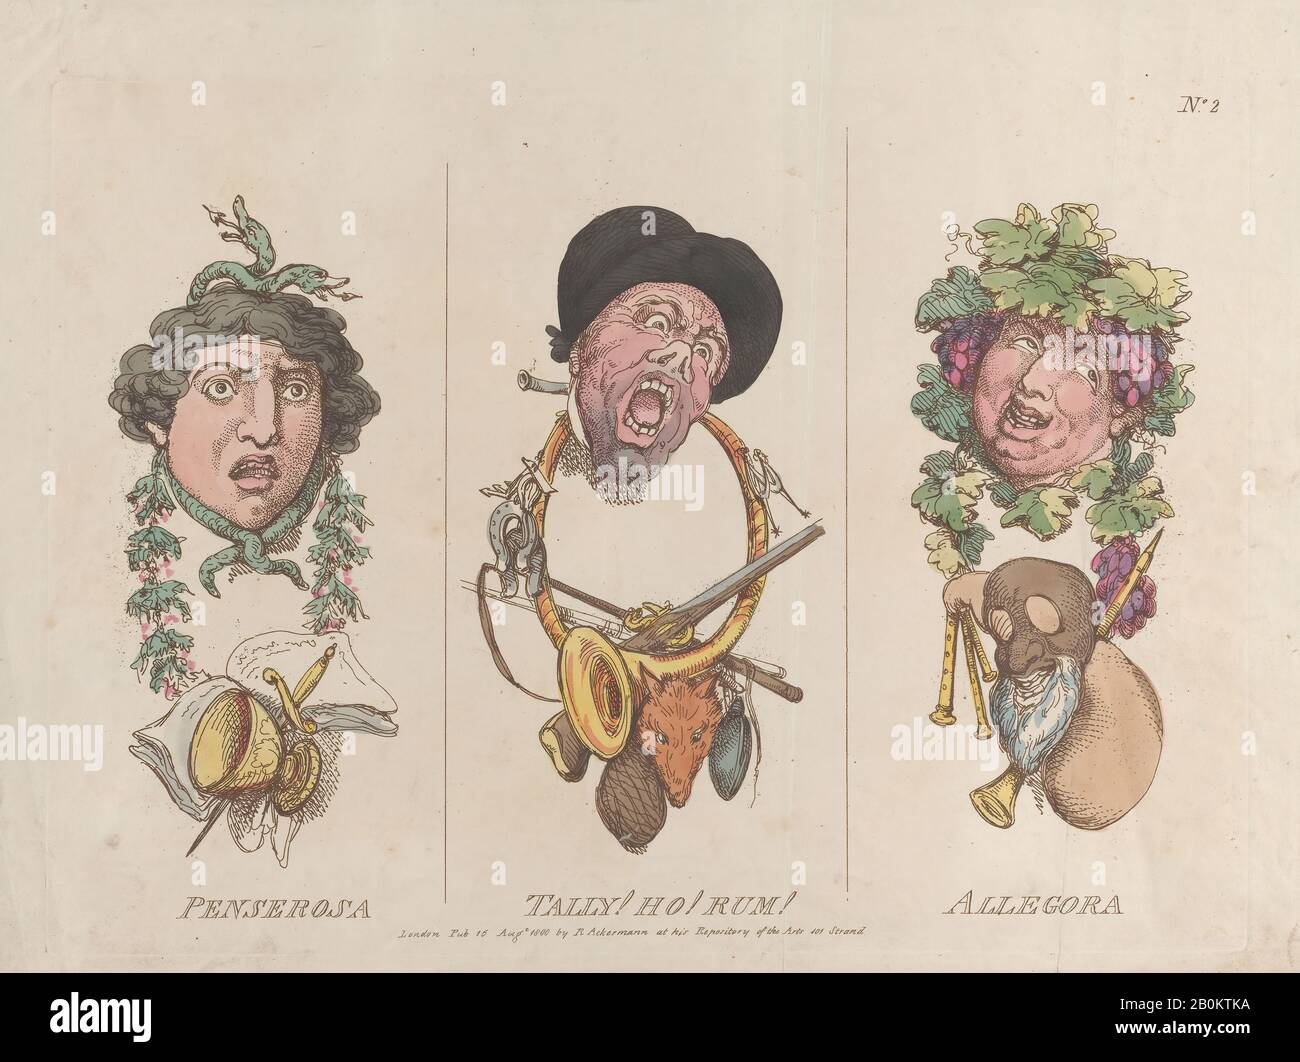 Thomas Rowlandson, Penserosa, Tally! Ho! Rum!, Allegora, Thomas Rowlandson (British, London 1757–1827 London), August 15, 1800, Hand-colored etching, Plate: 10 5/8 × 14 5/8 in. (27 × 37.1 cm), Sheet: 12 1/8 × 16 3/16 in. (30.8 × 41.1 cm), Prints Stock Photo